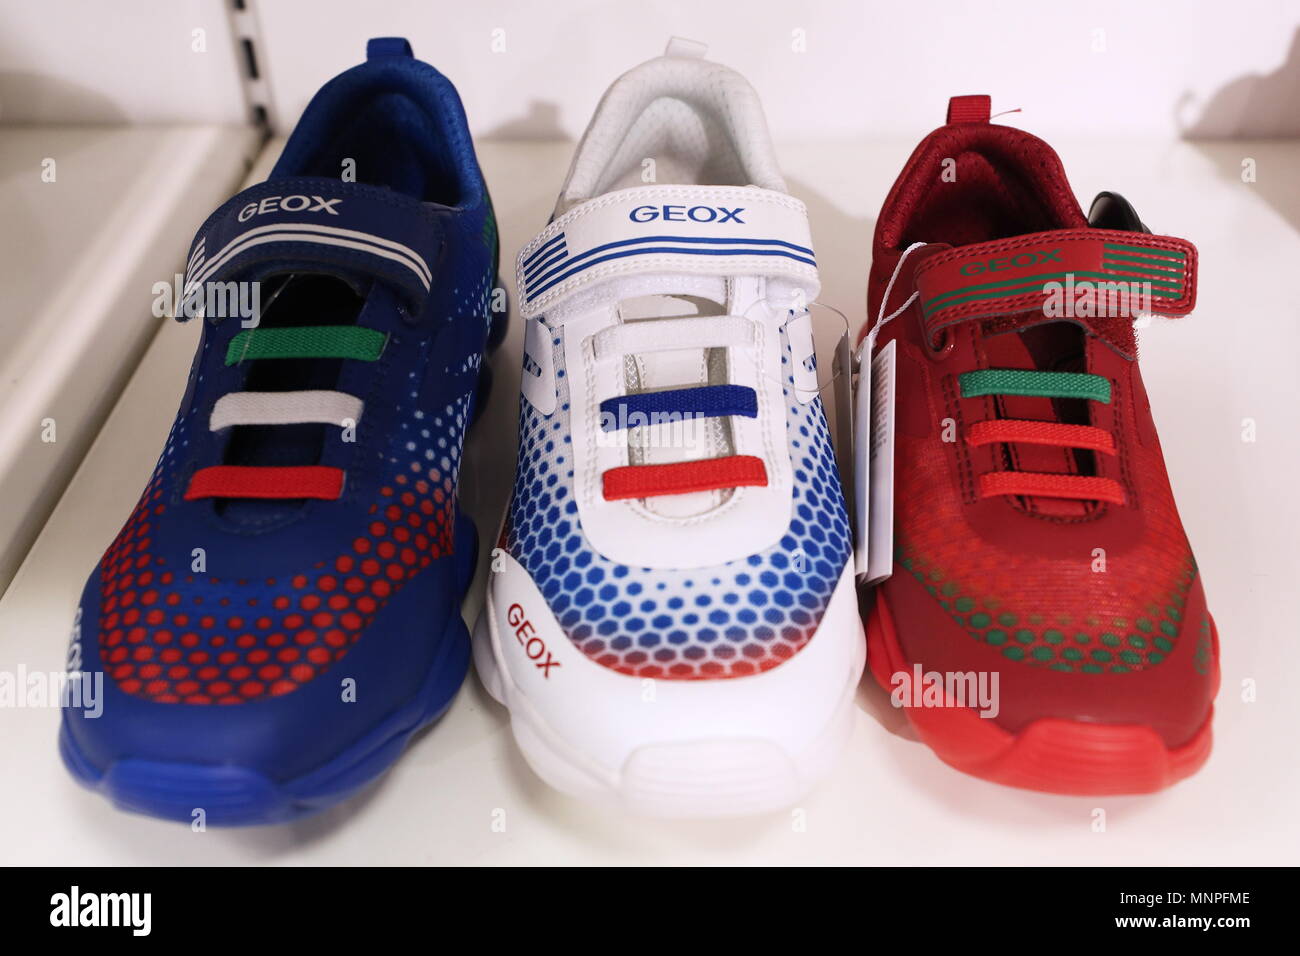 Moscow, Russia. 19th May, 2018. MOSCOW, RUSSIA - MAY 19, 2018: Children's  trainers in colours of 2018 FIFA World Cup teams - Italy, Spain, Brazil,  the United Kingdom, Germany and Russia -